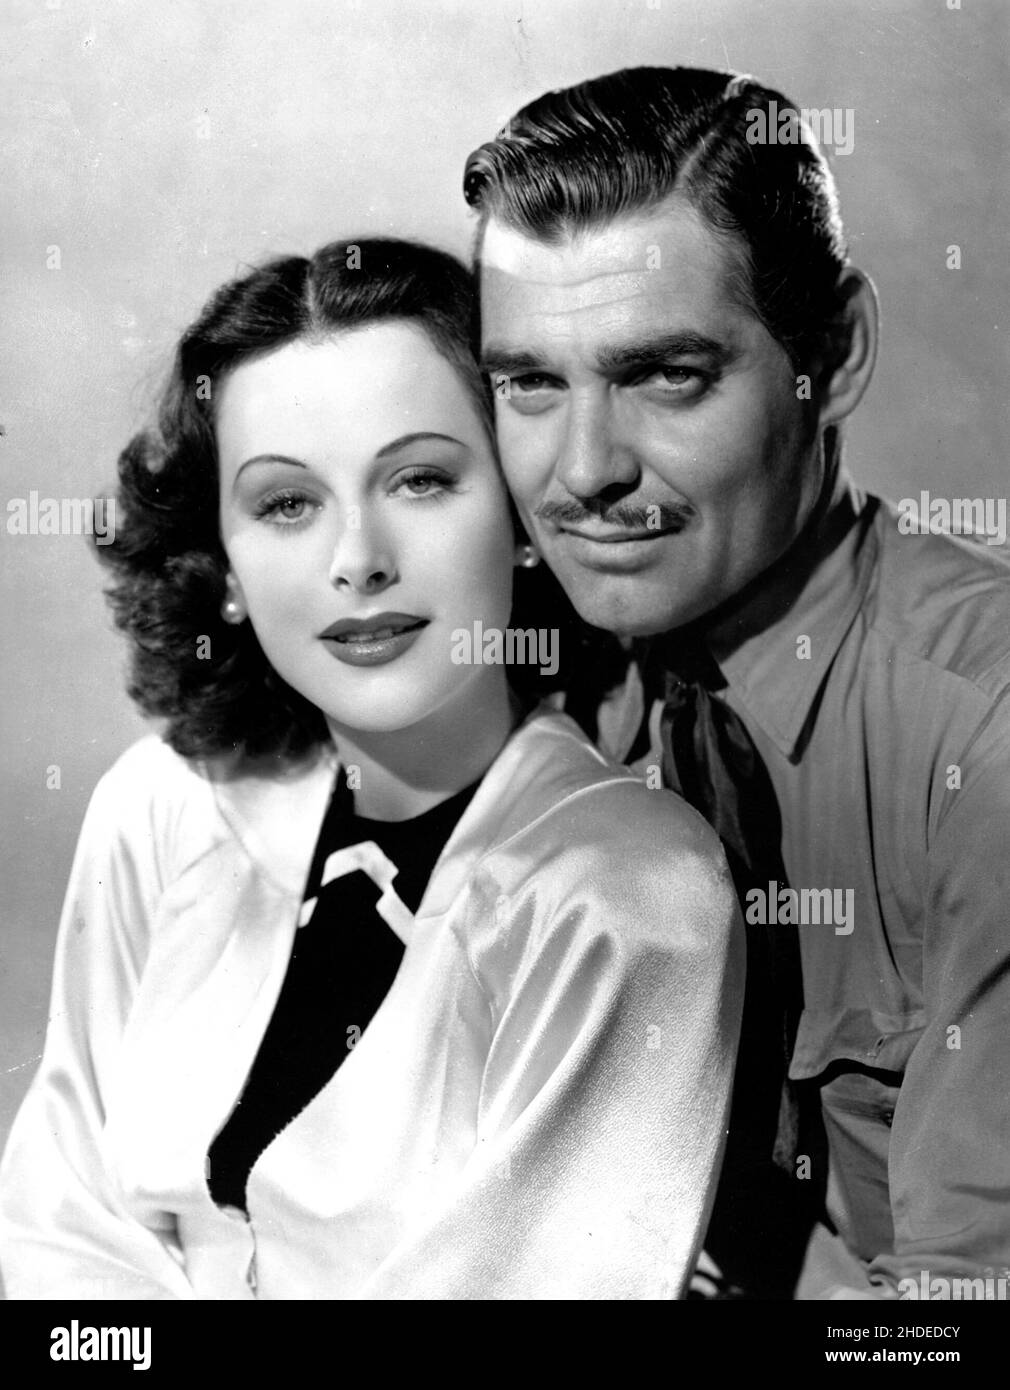 CLARK GABLE and HEDY LAMARR in BOOM TOWN (1940), directed by JACK CONWAY. Credit: M.G.M. / Album Stock Photo